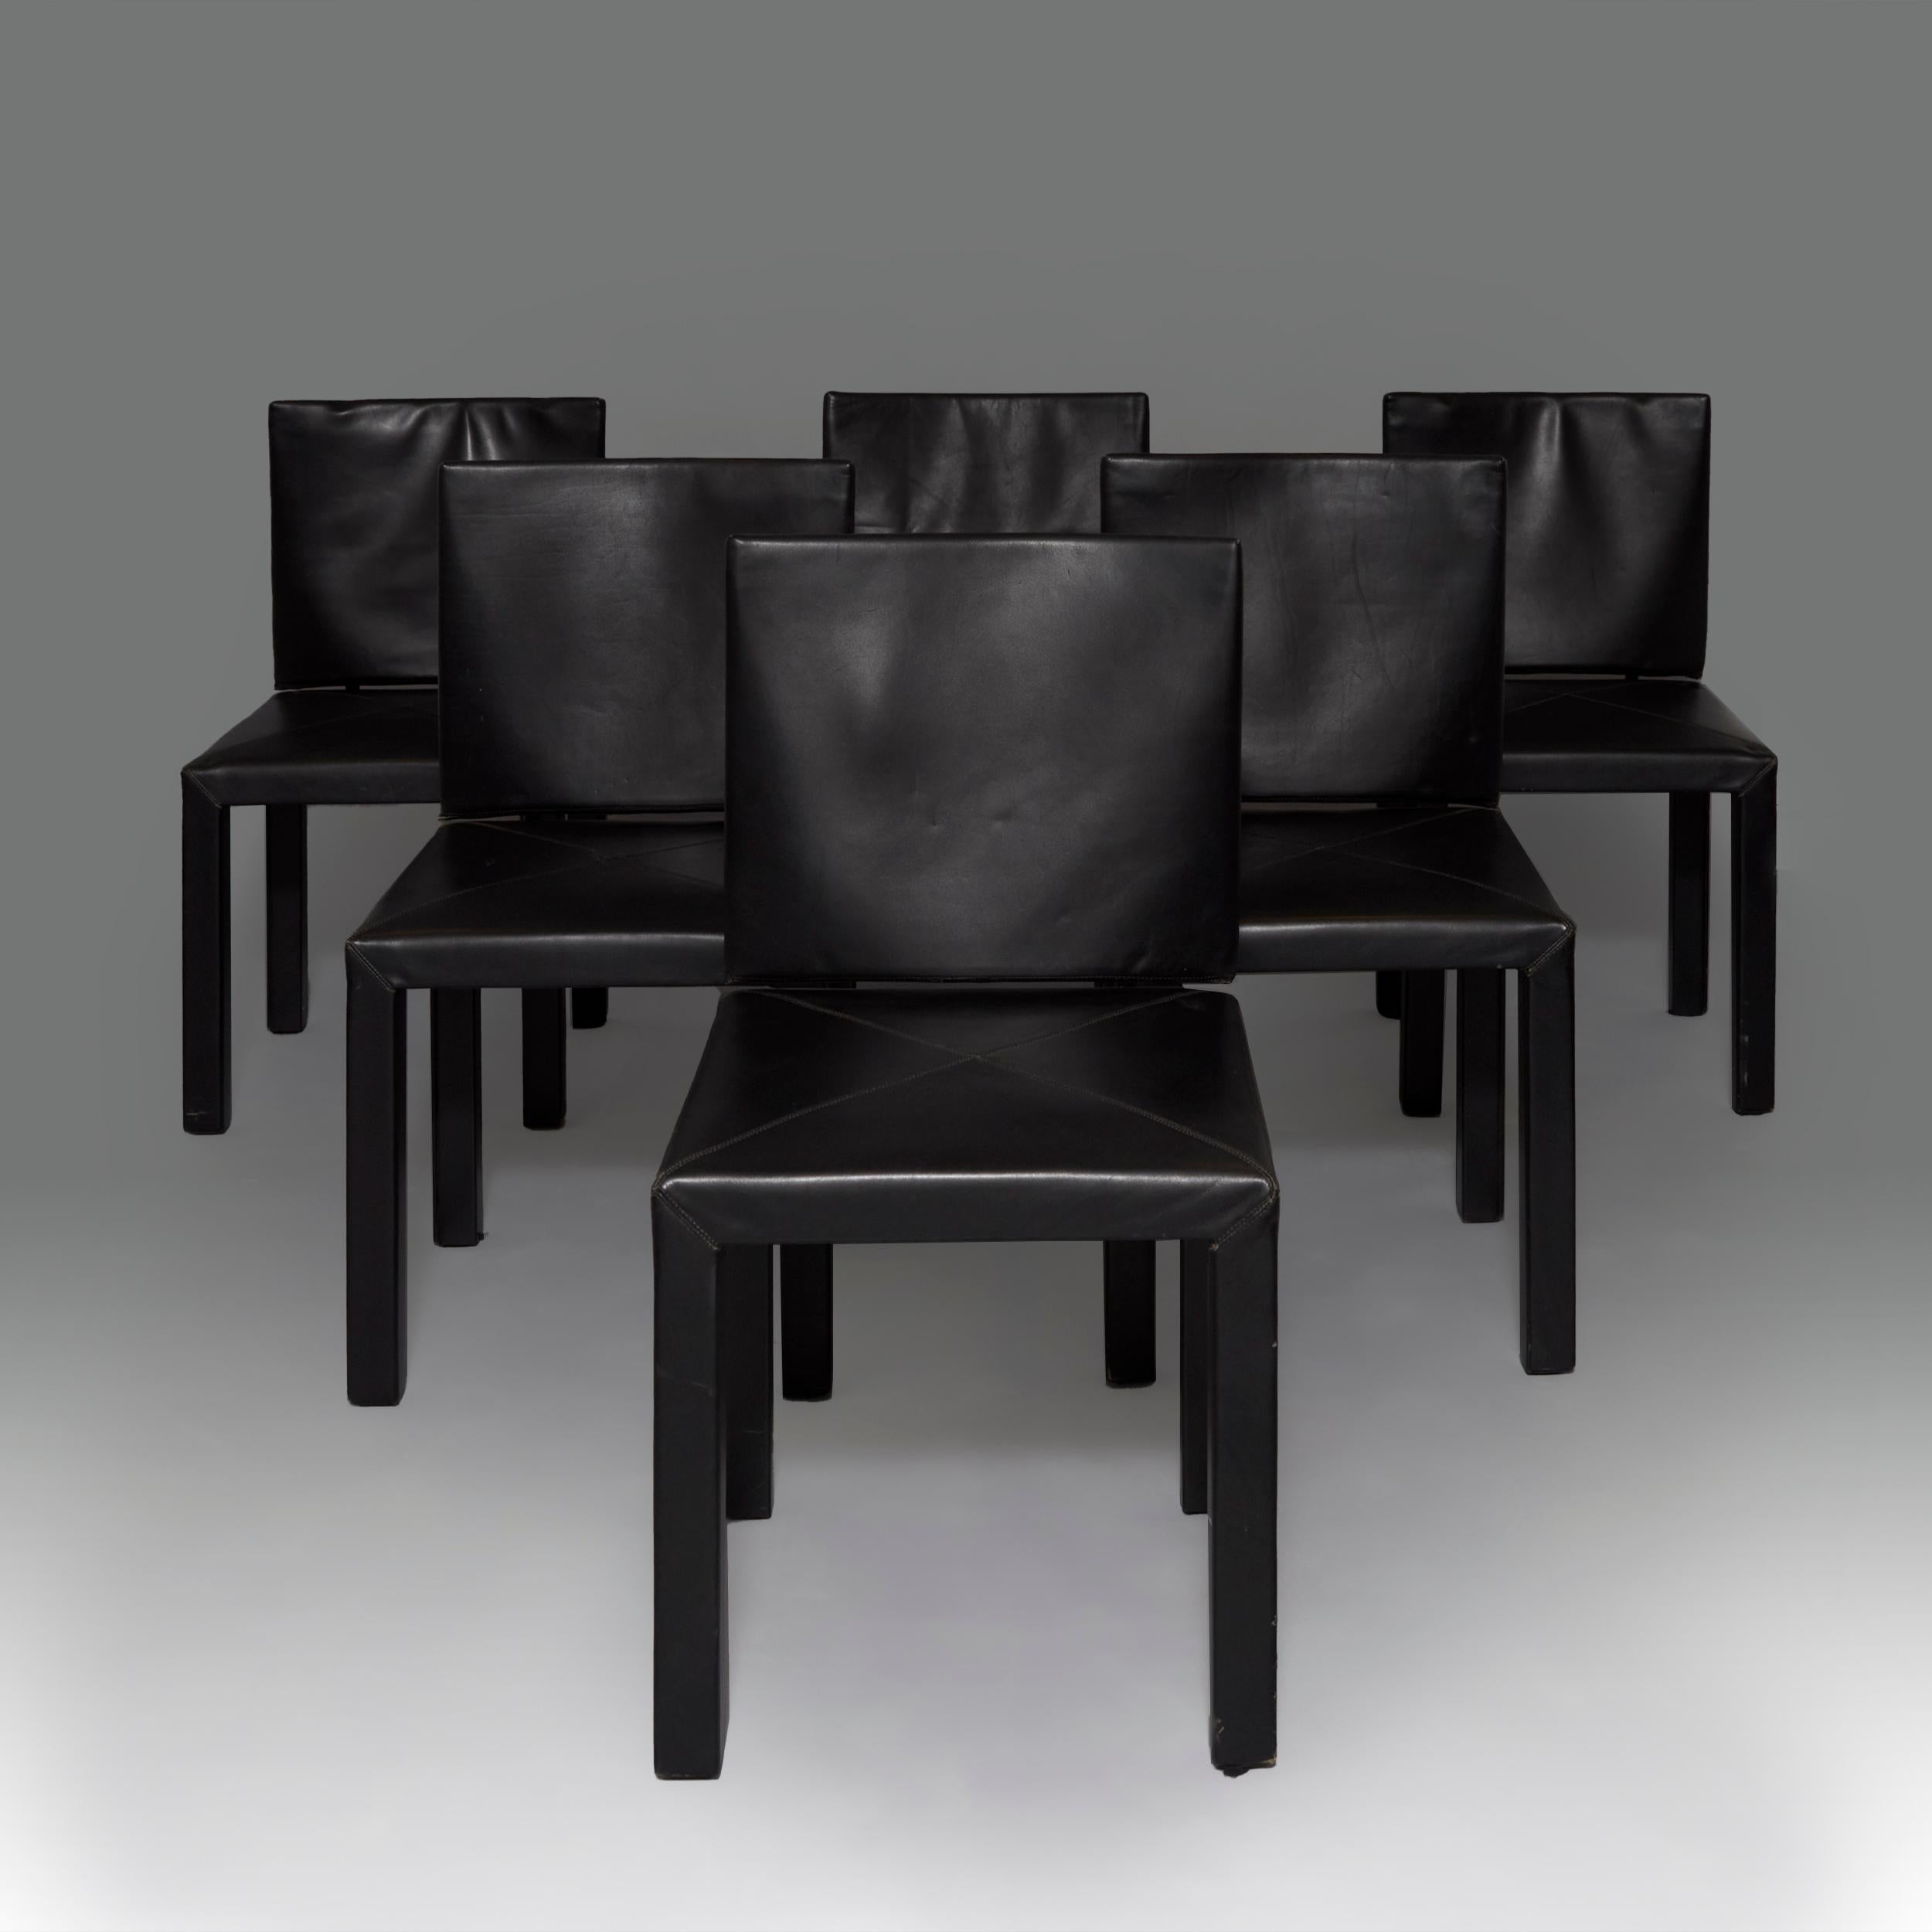 6 Dining room chair set in black leather and steel designed by Paolo Piva for B&B Italia, original leather with signs of use and patina. Italy 1980s
Born in 1950s In Italy, paolo Piva was a designer based in Italy and Vienna. He studied with master